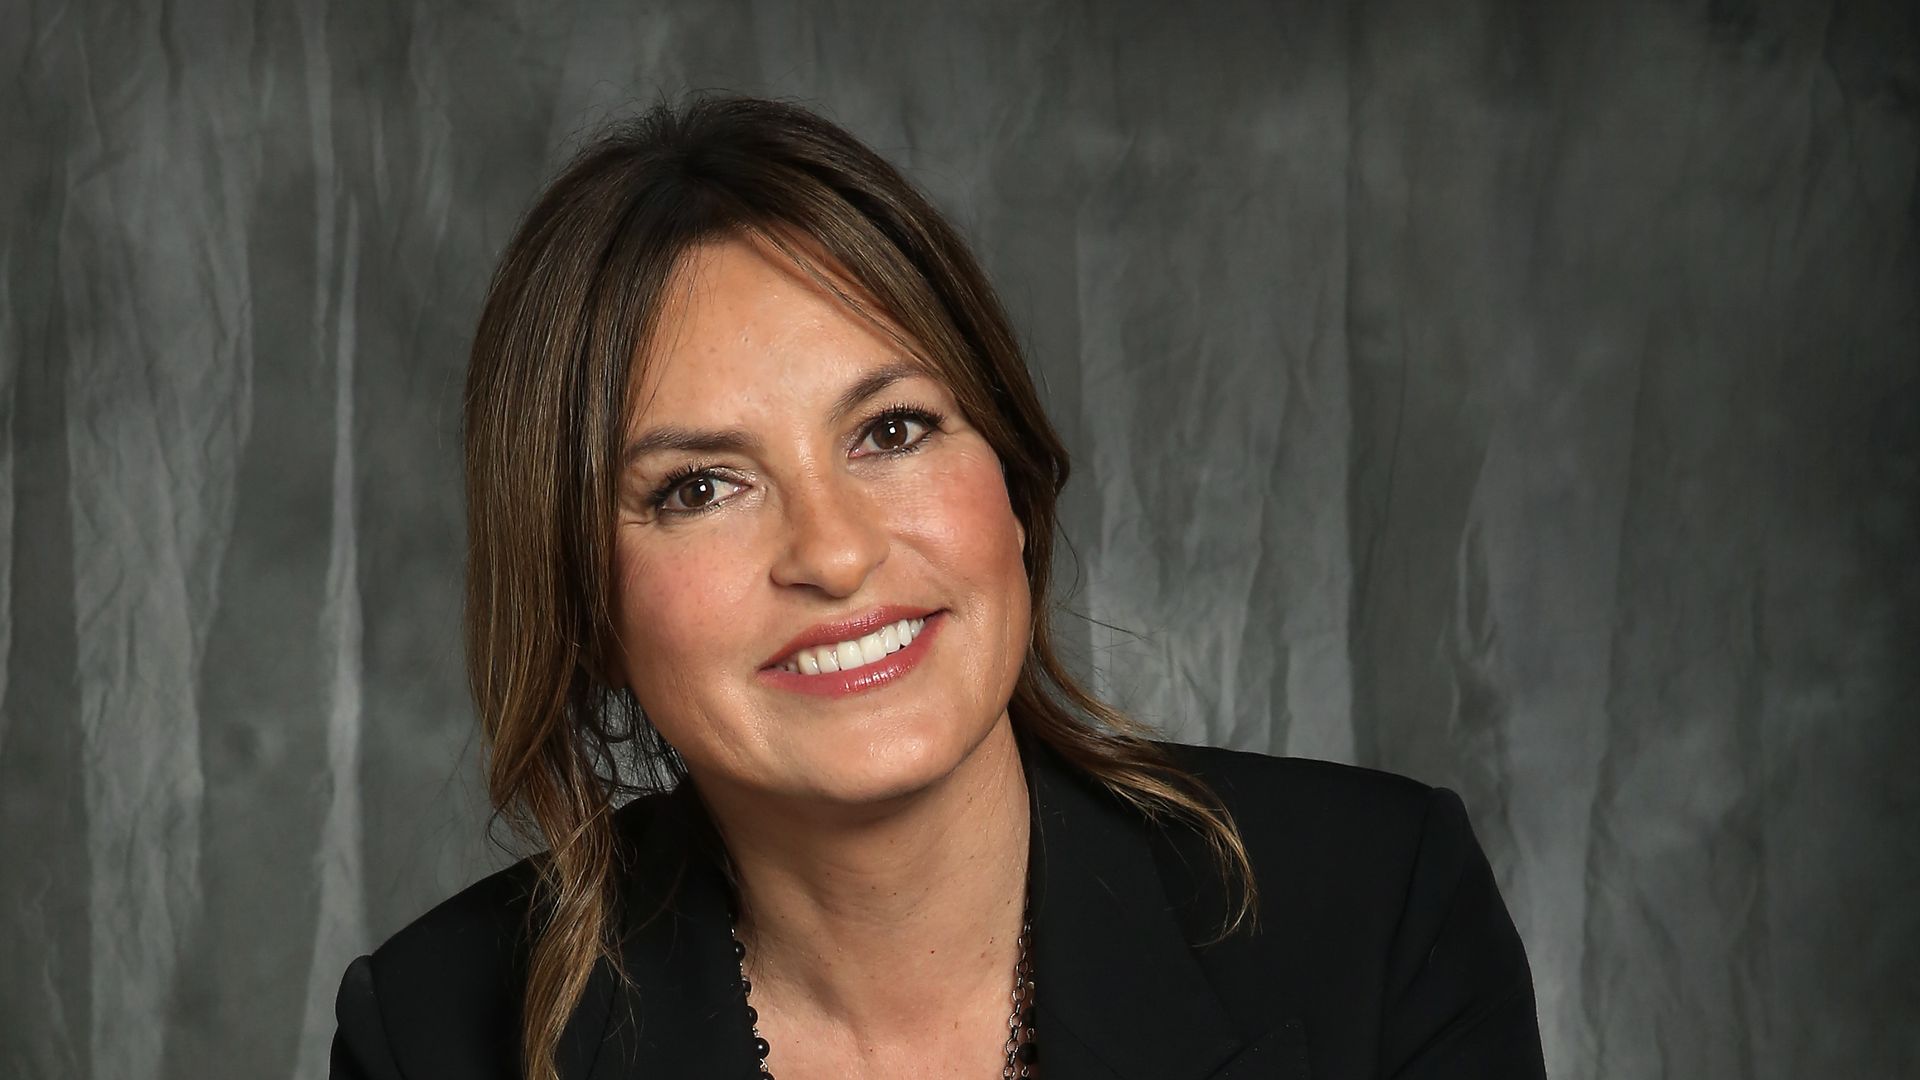 Mariska Hargitay looks like a supermodel in breath-taking new covershoot - and its a far cry from Law & Order